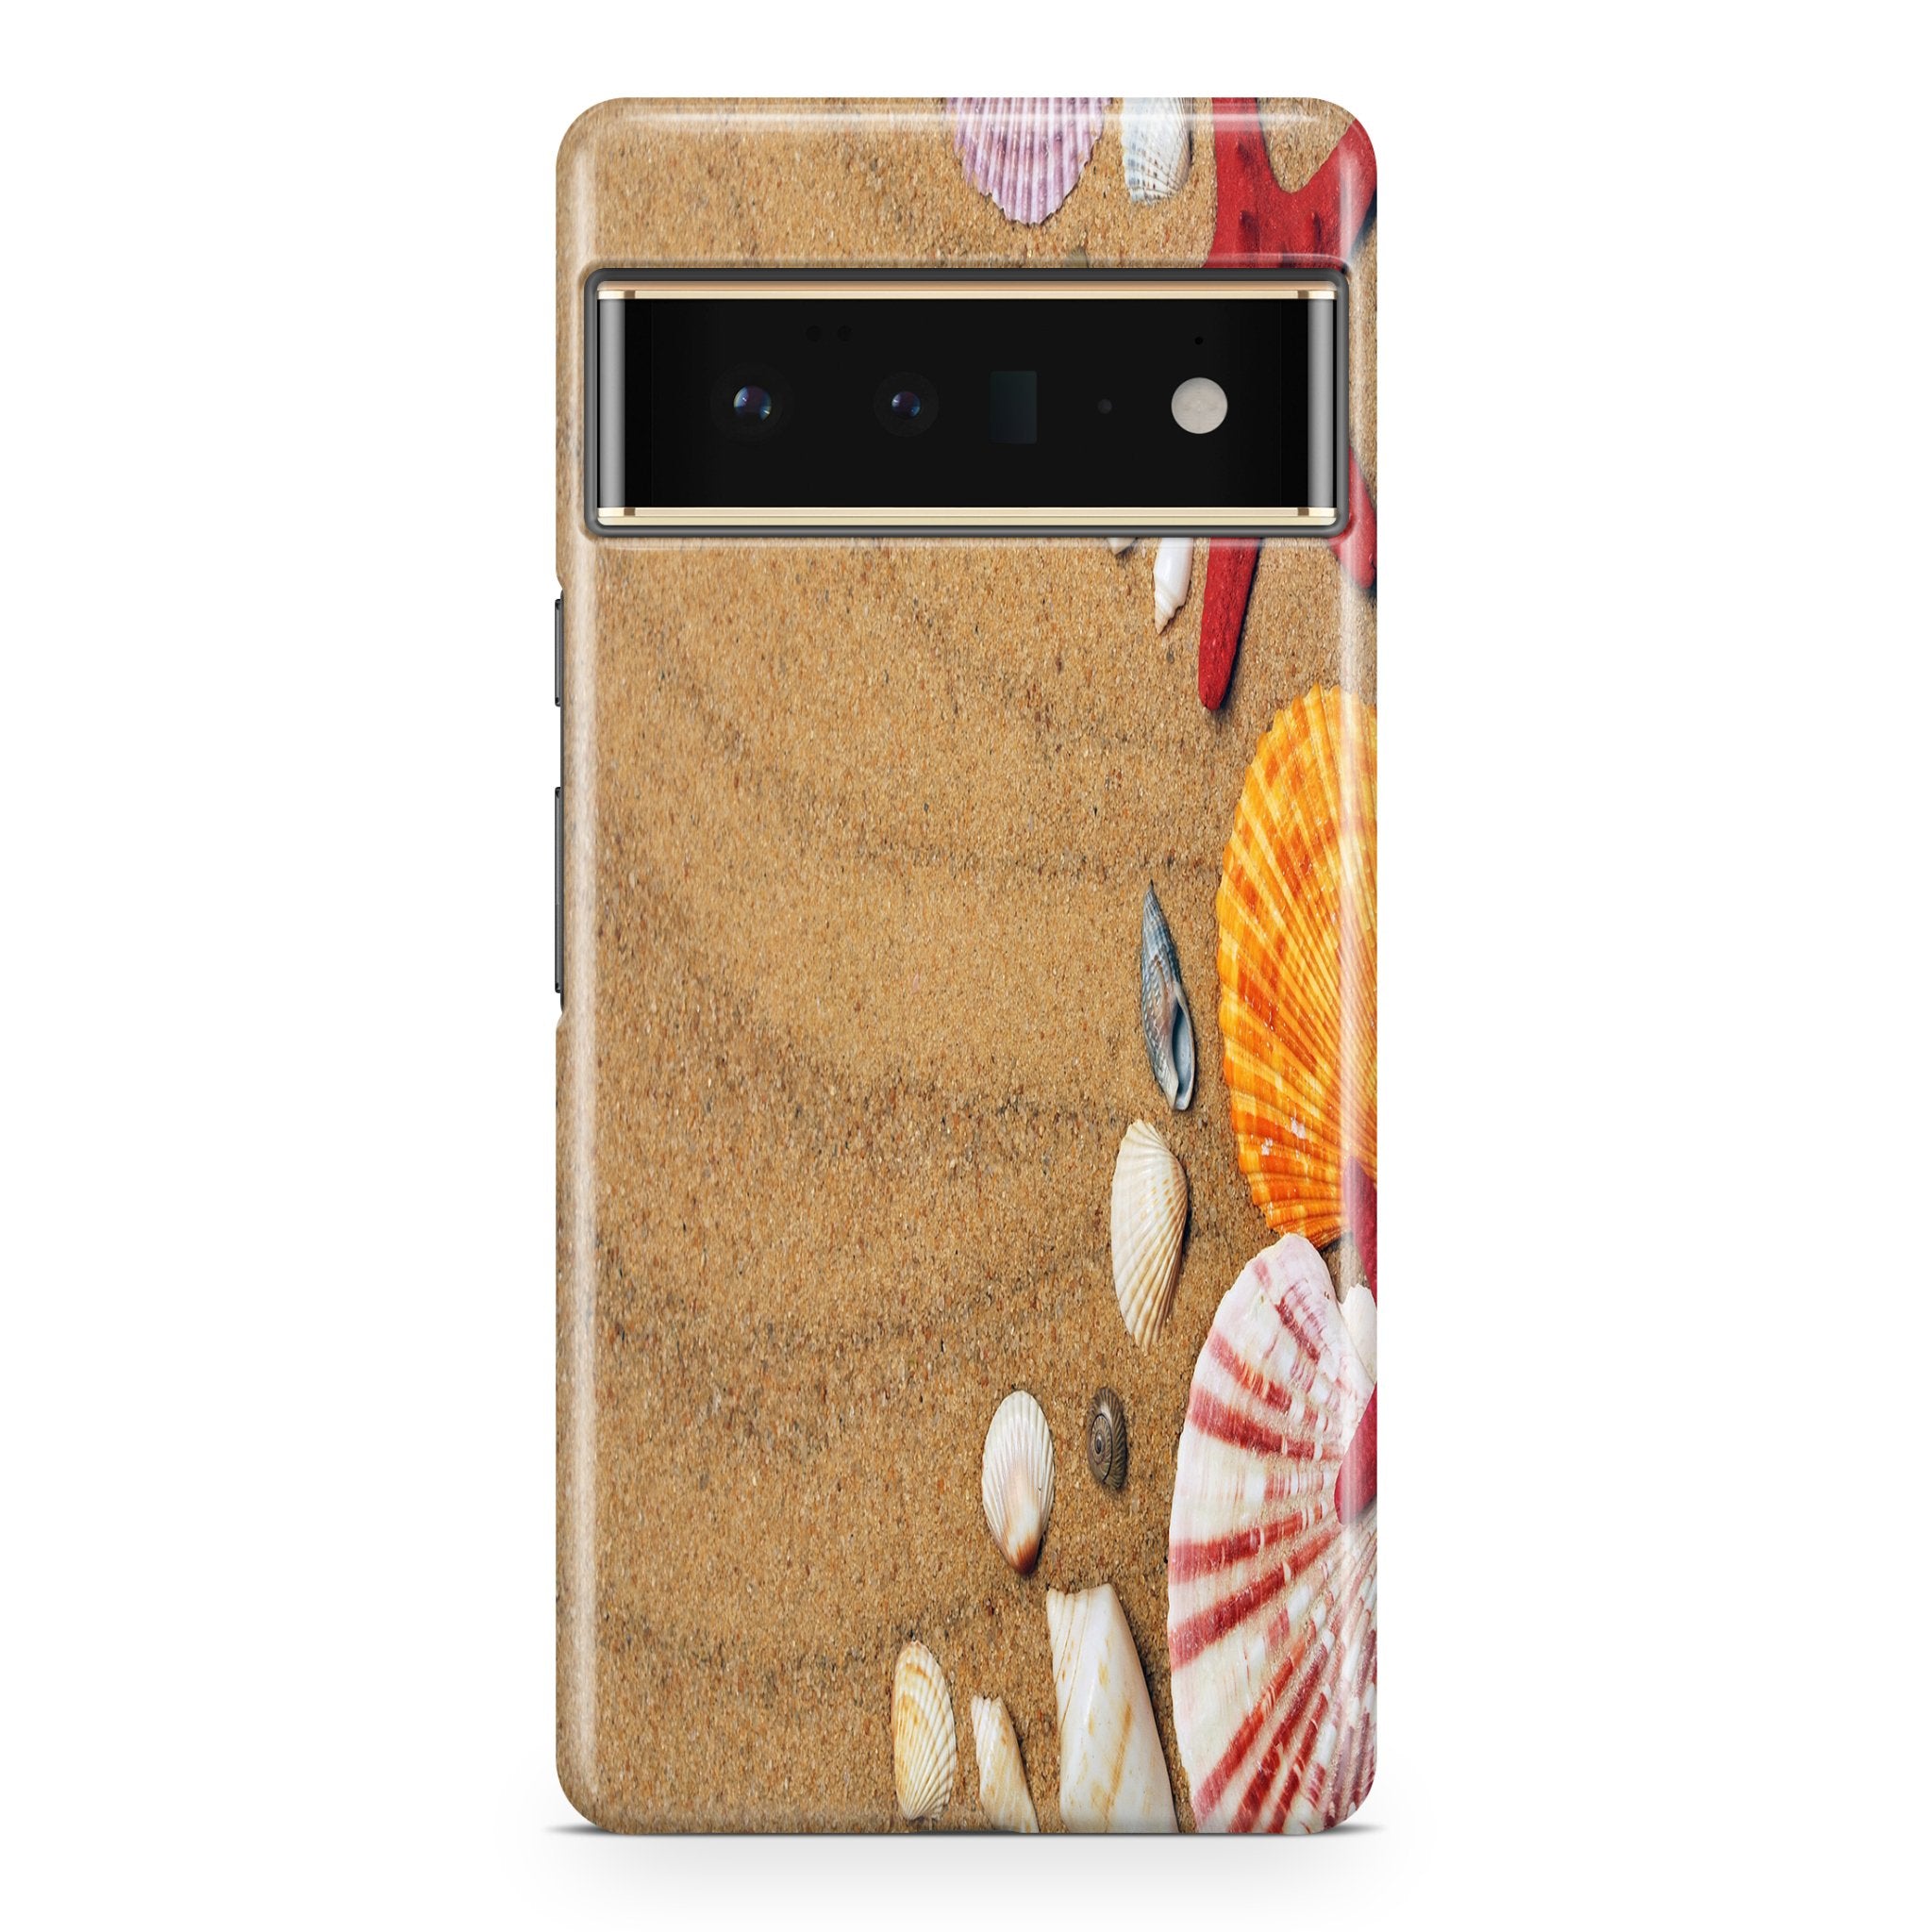 Beach Time - Google phone case designs by CaseSwagger